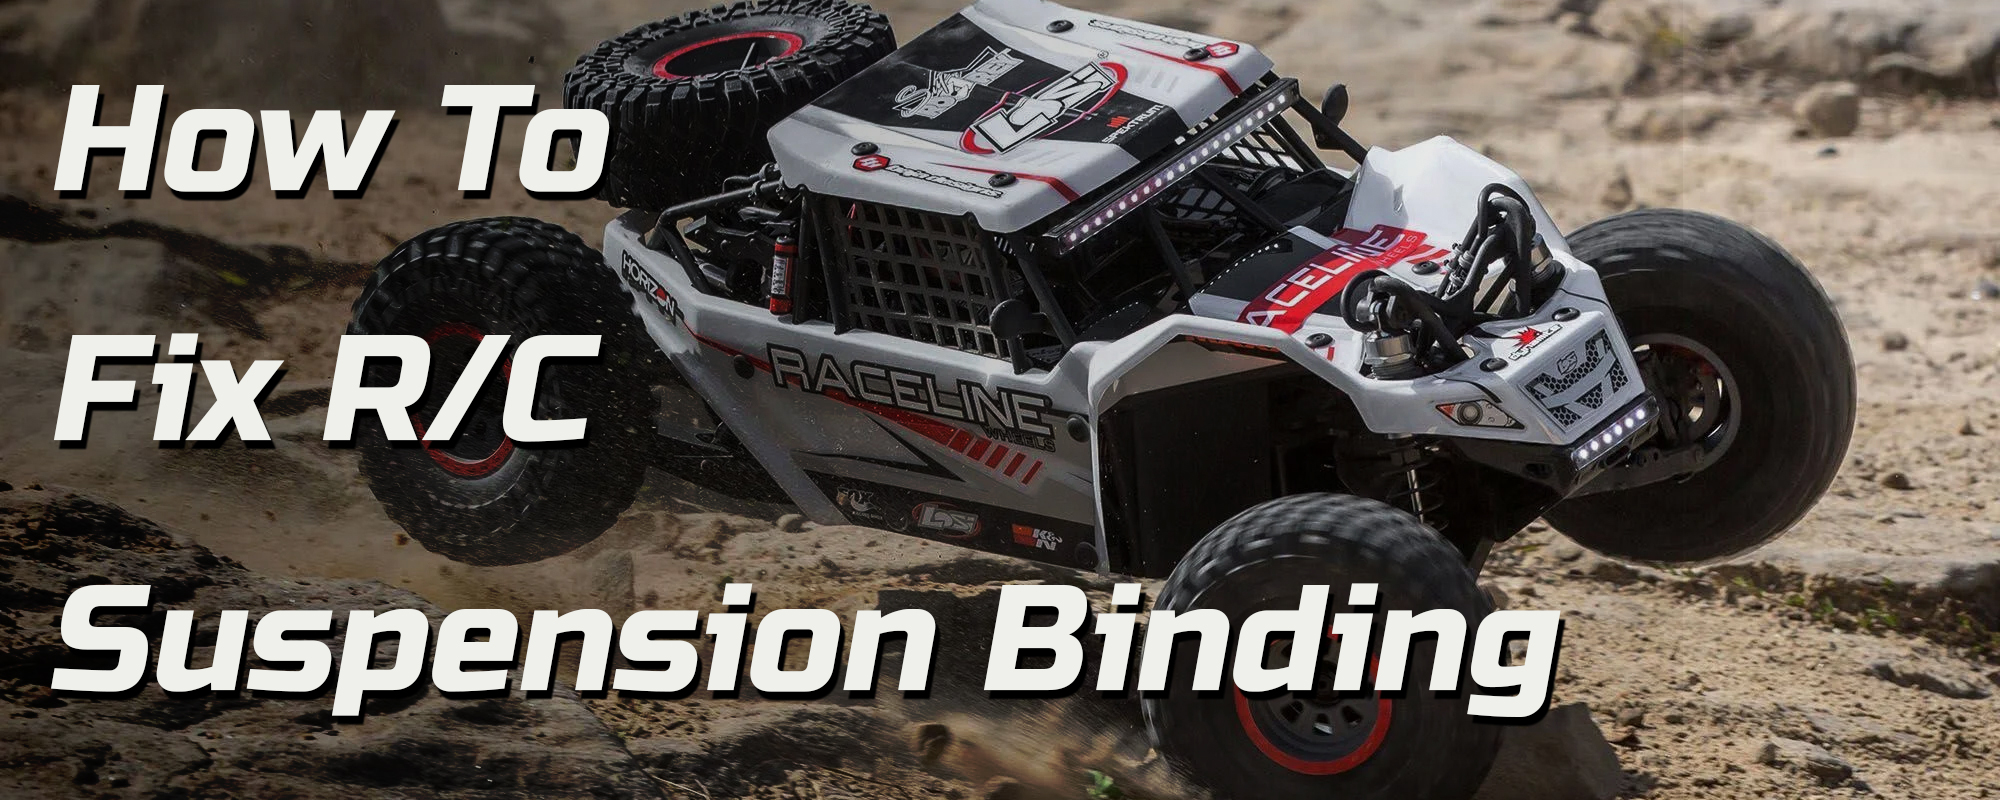 How to Check and Fix RC Suspension Binding